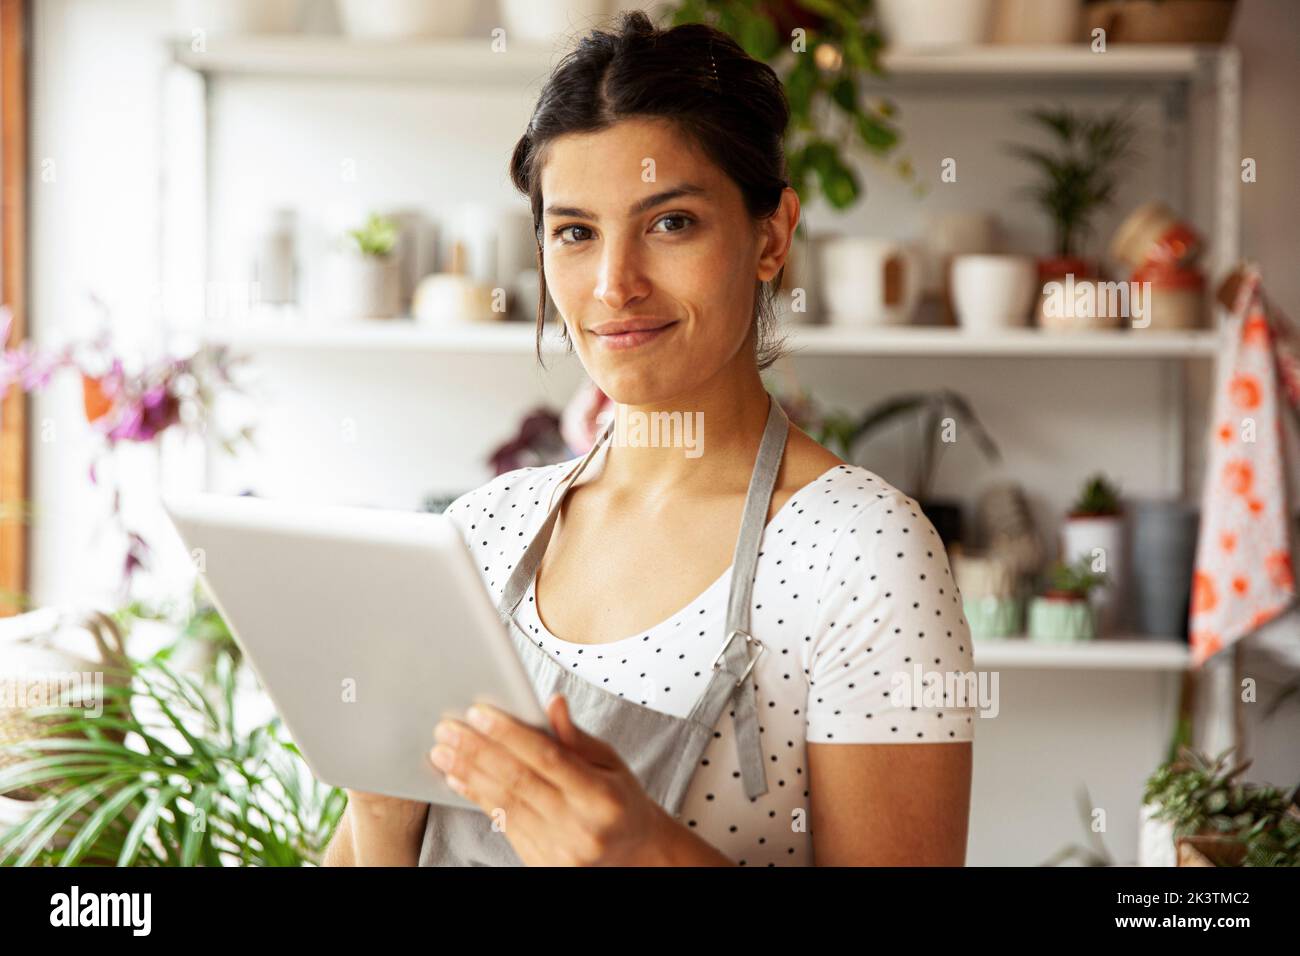 Young adult female nursery worker holding digital tablet Stock Photo